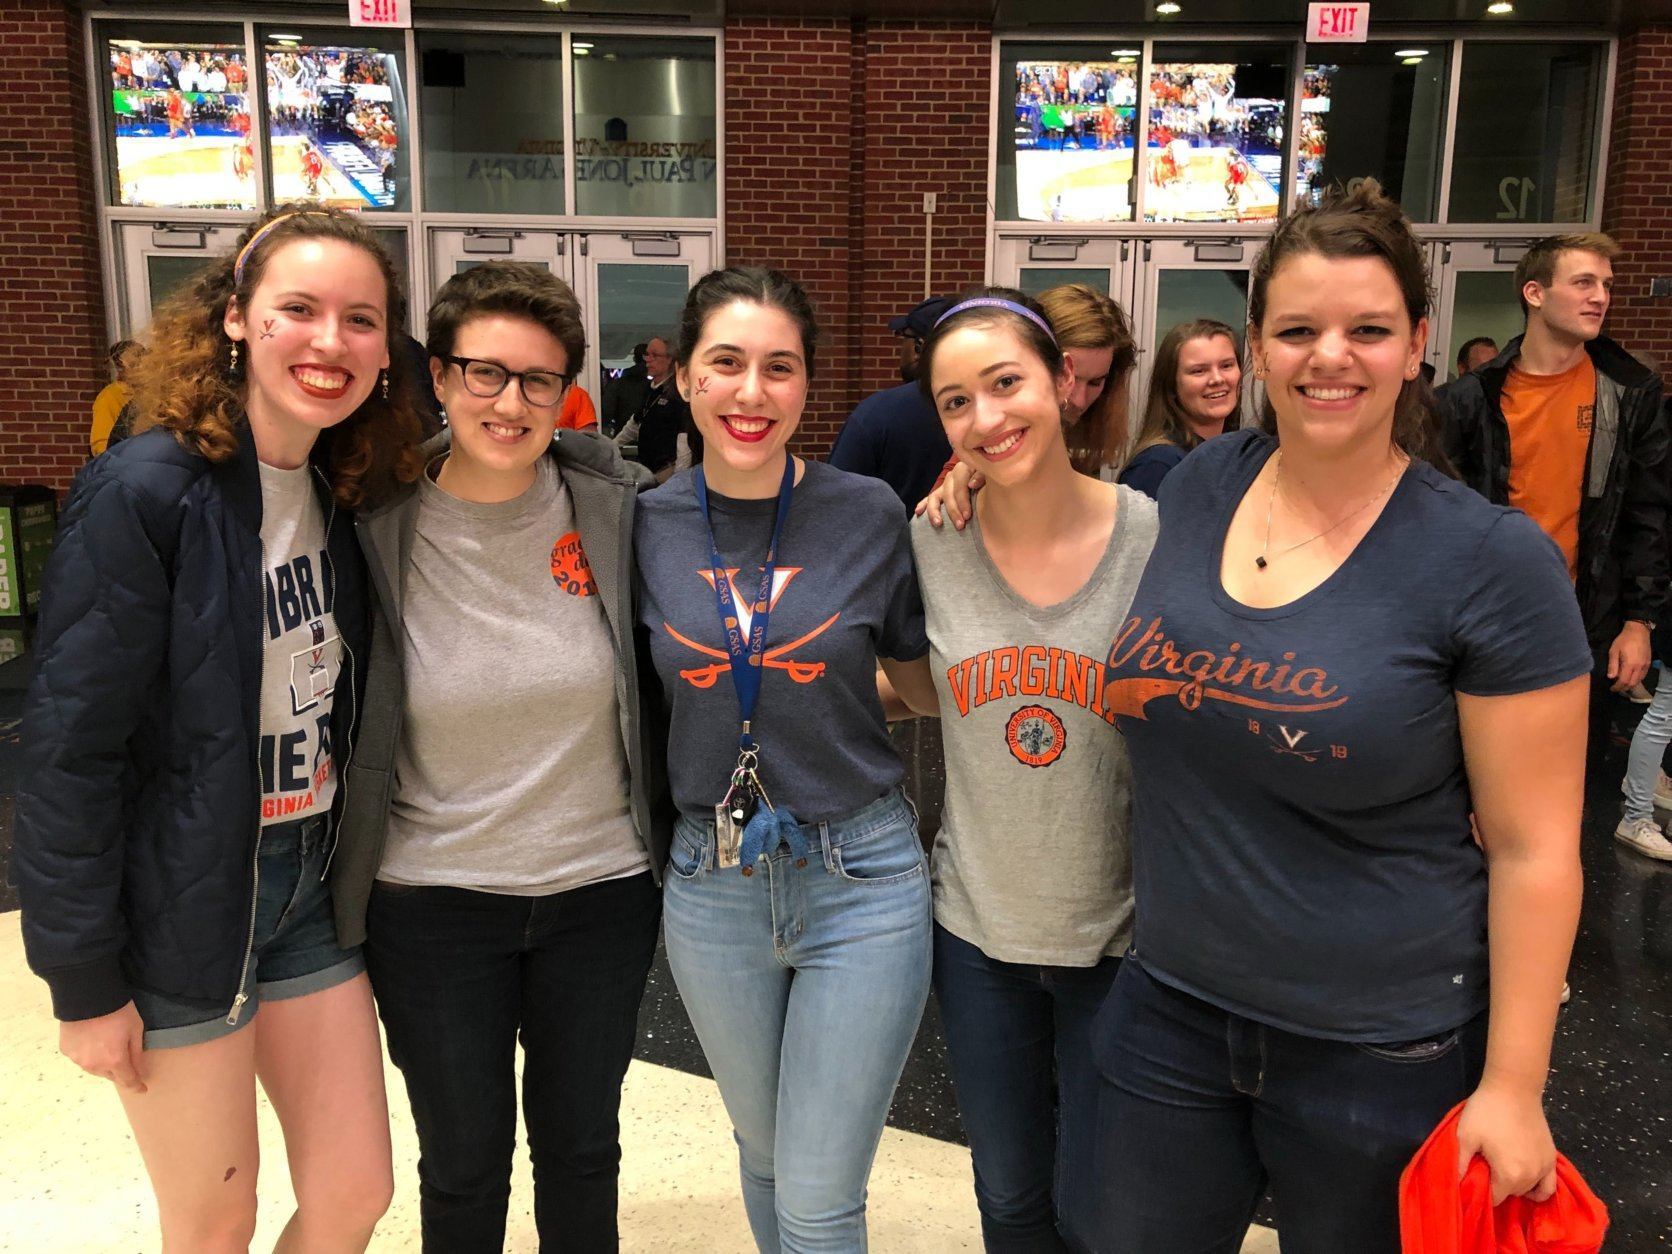 U.Va graduate students studying to be Spanish teachers. One described anxiously sitting on the edge of her seat during the game. Another said she was pumping her fist so strongly in the air, she became concerned she’d throw her phone. (WTOP/Kristi King)